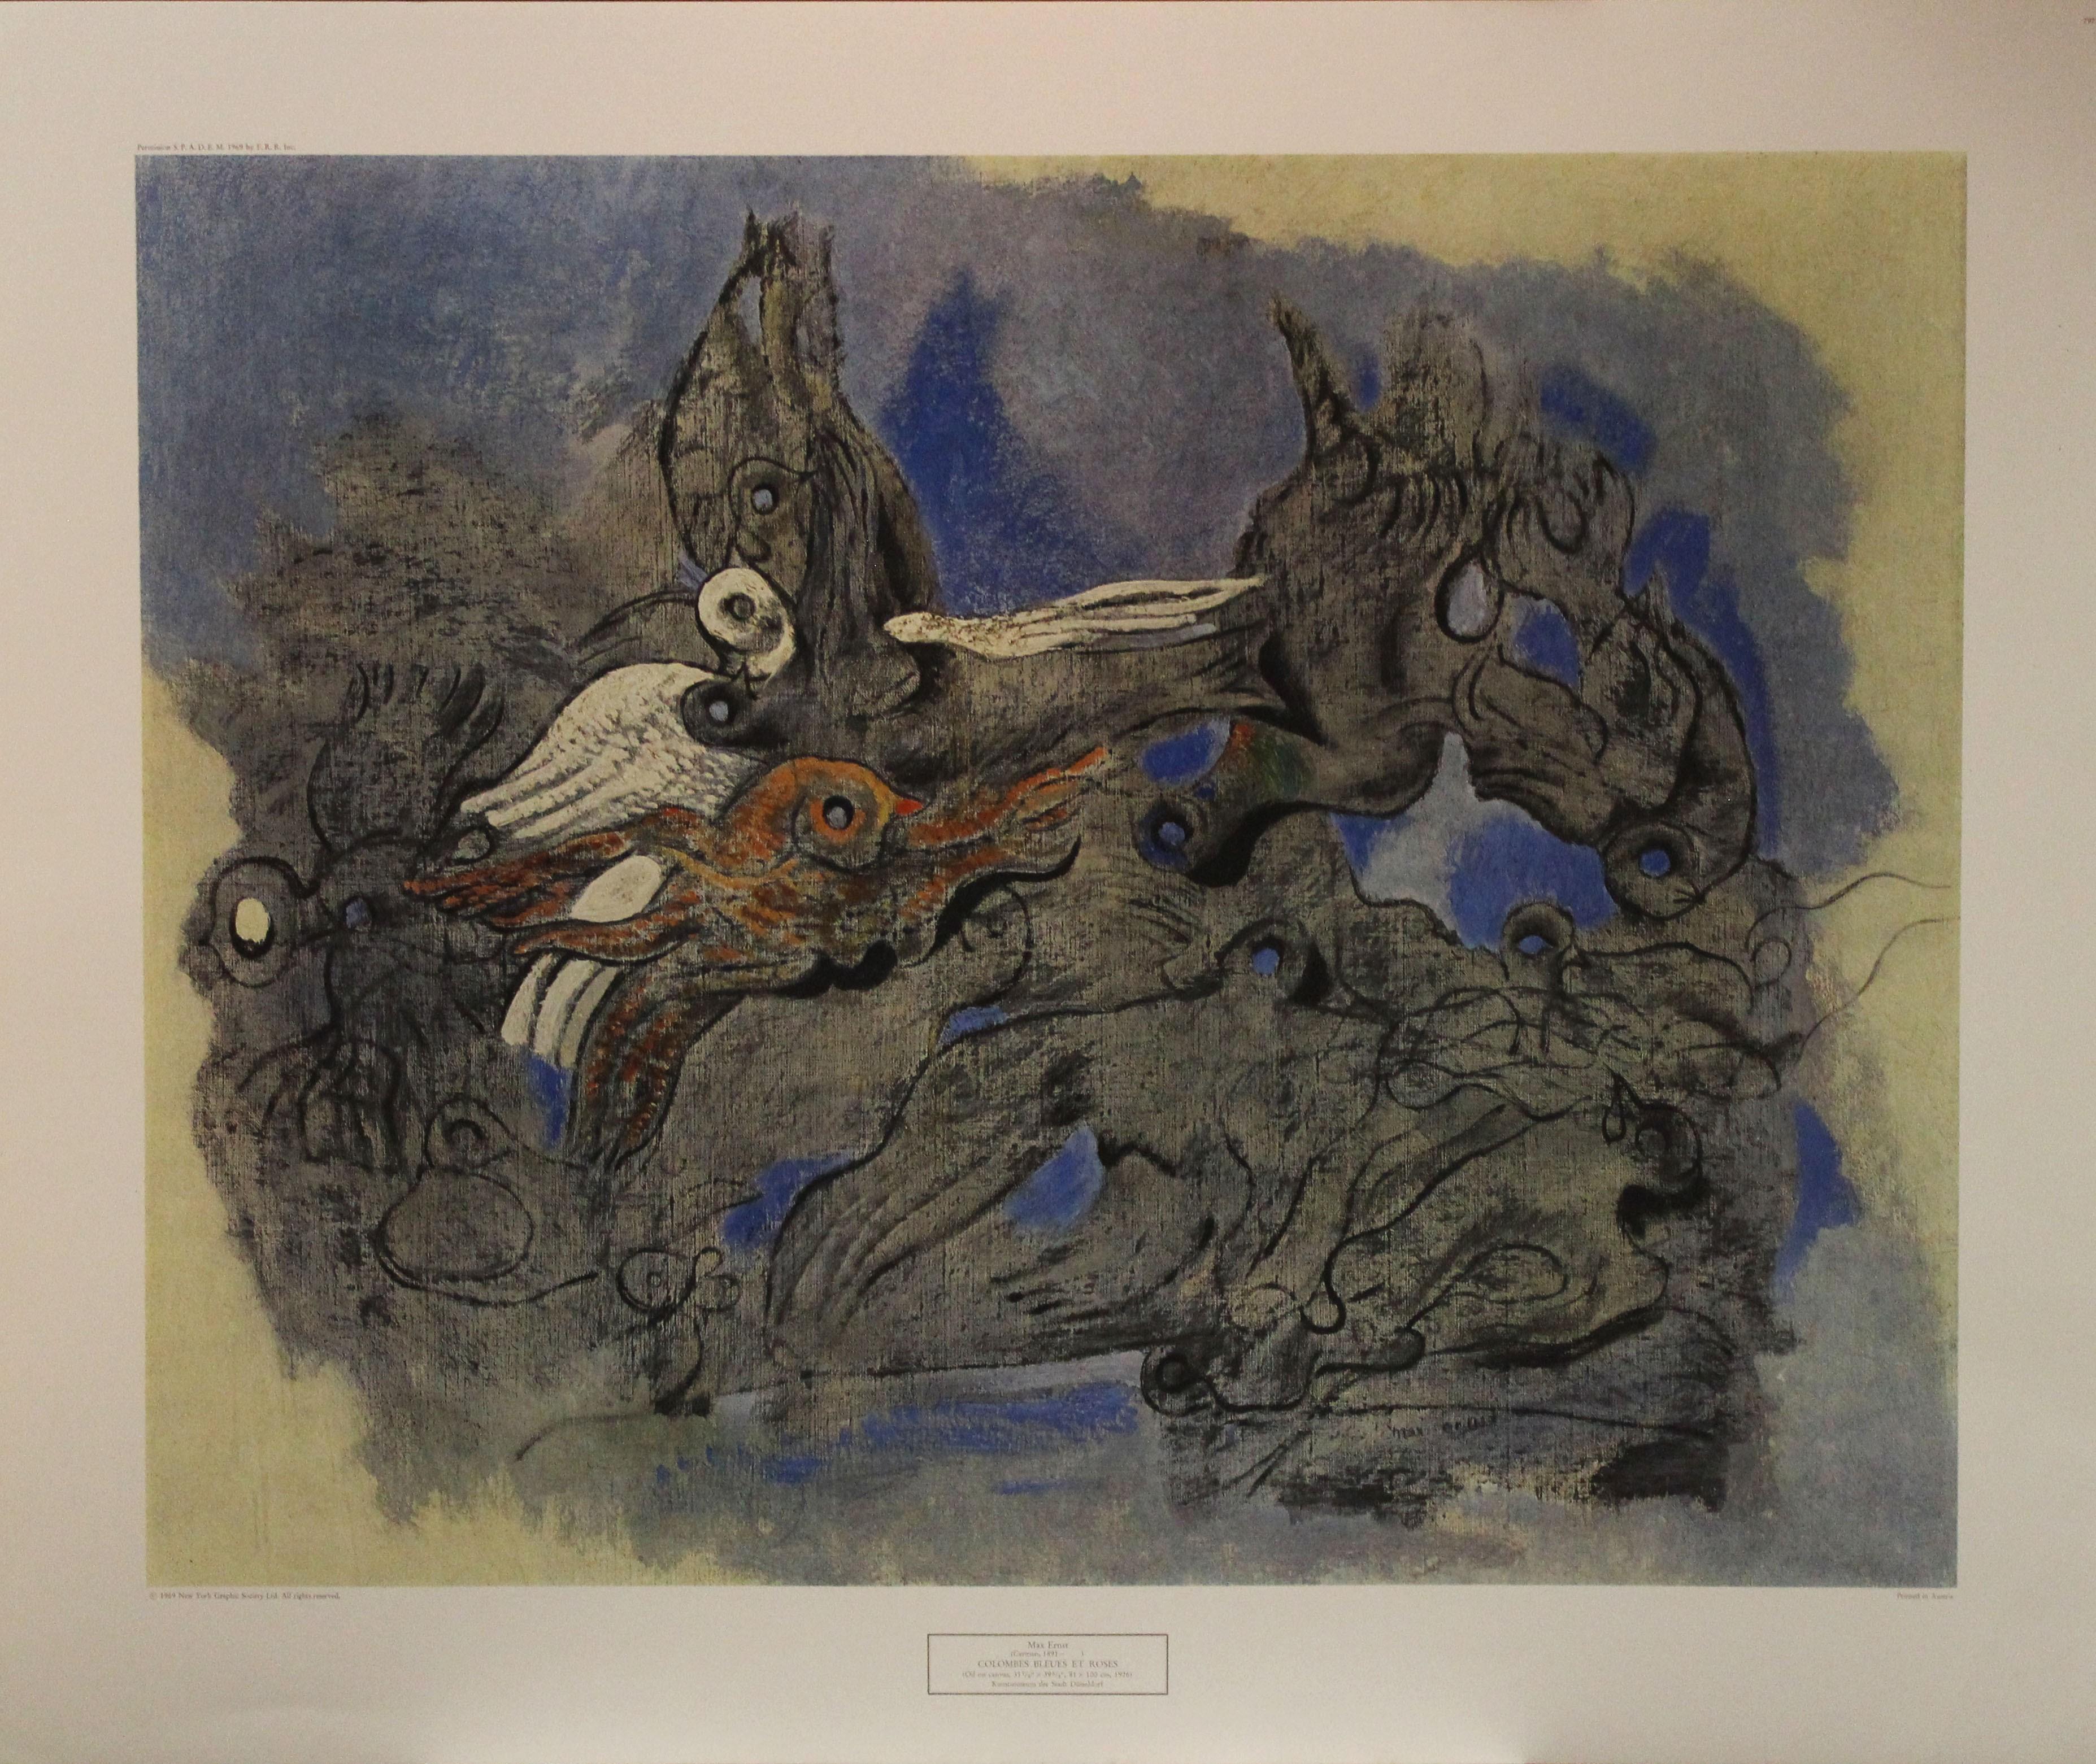 Figurative Print Max Ernst - Affiche Colombes Bleues et Roses, 1969, New York Graphic Society Ltd.